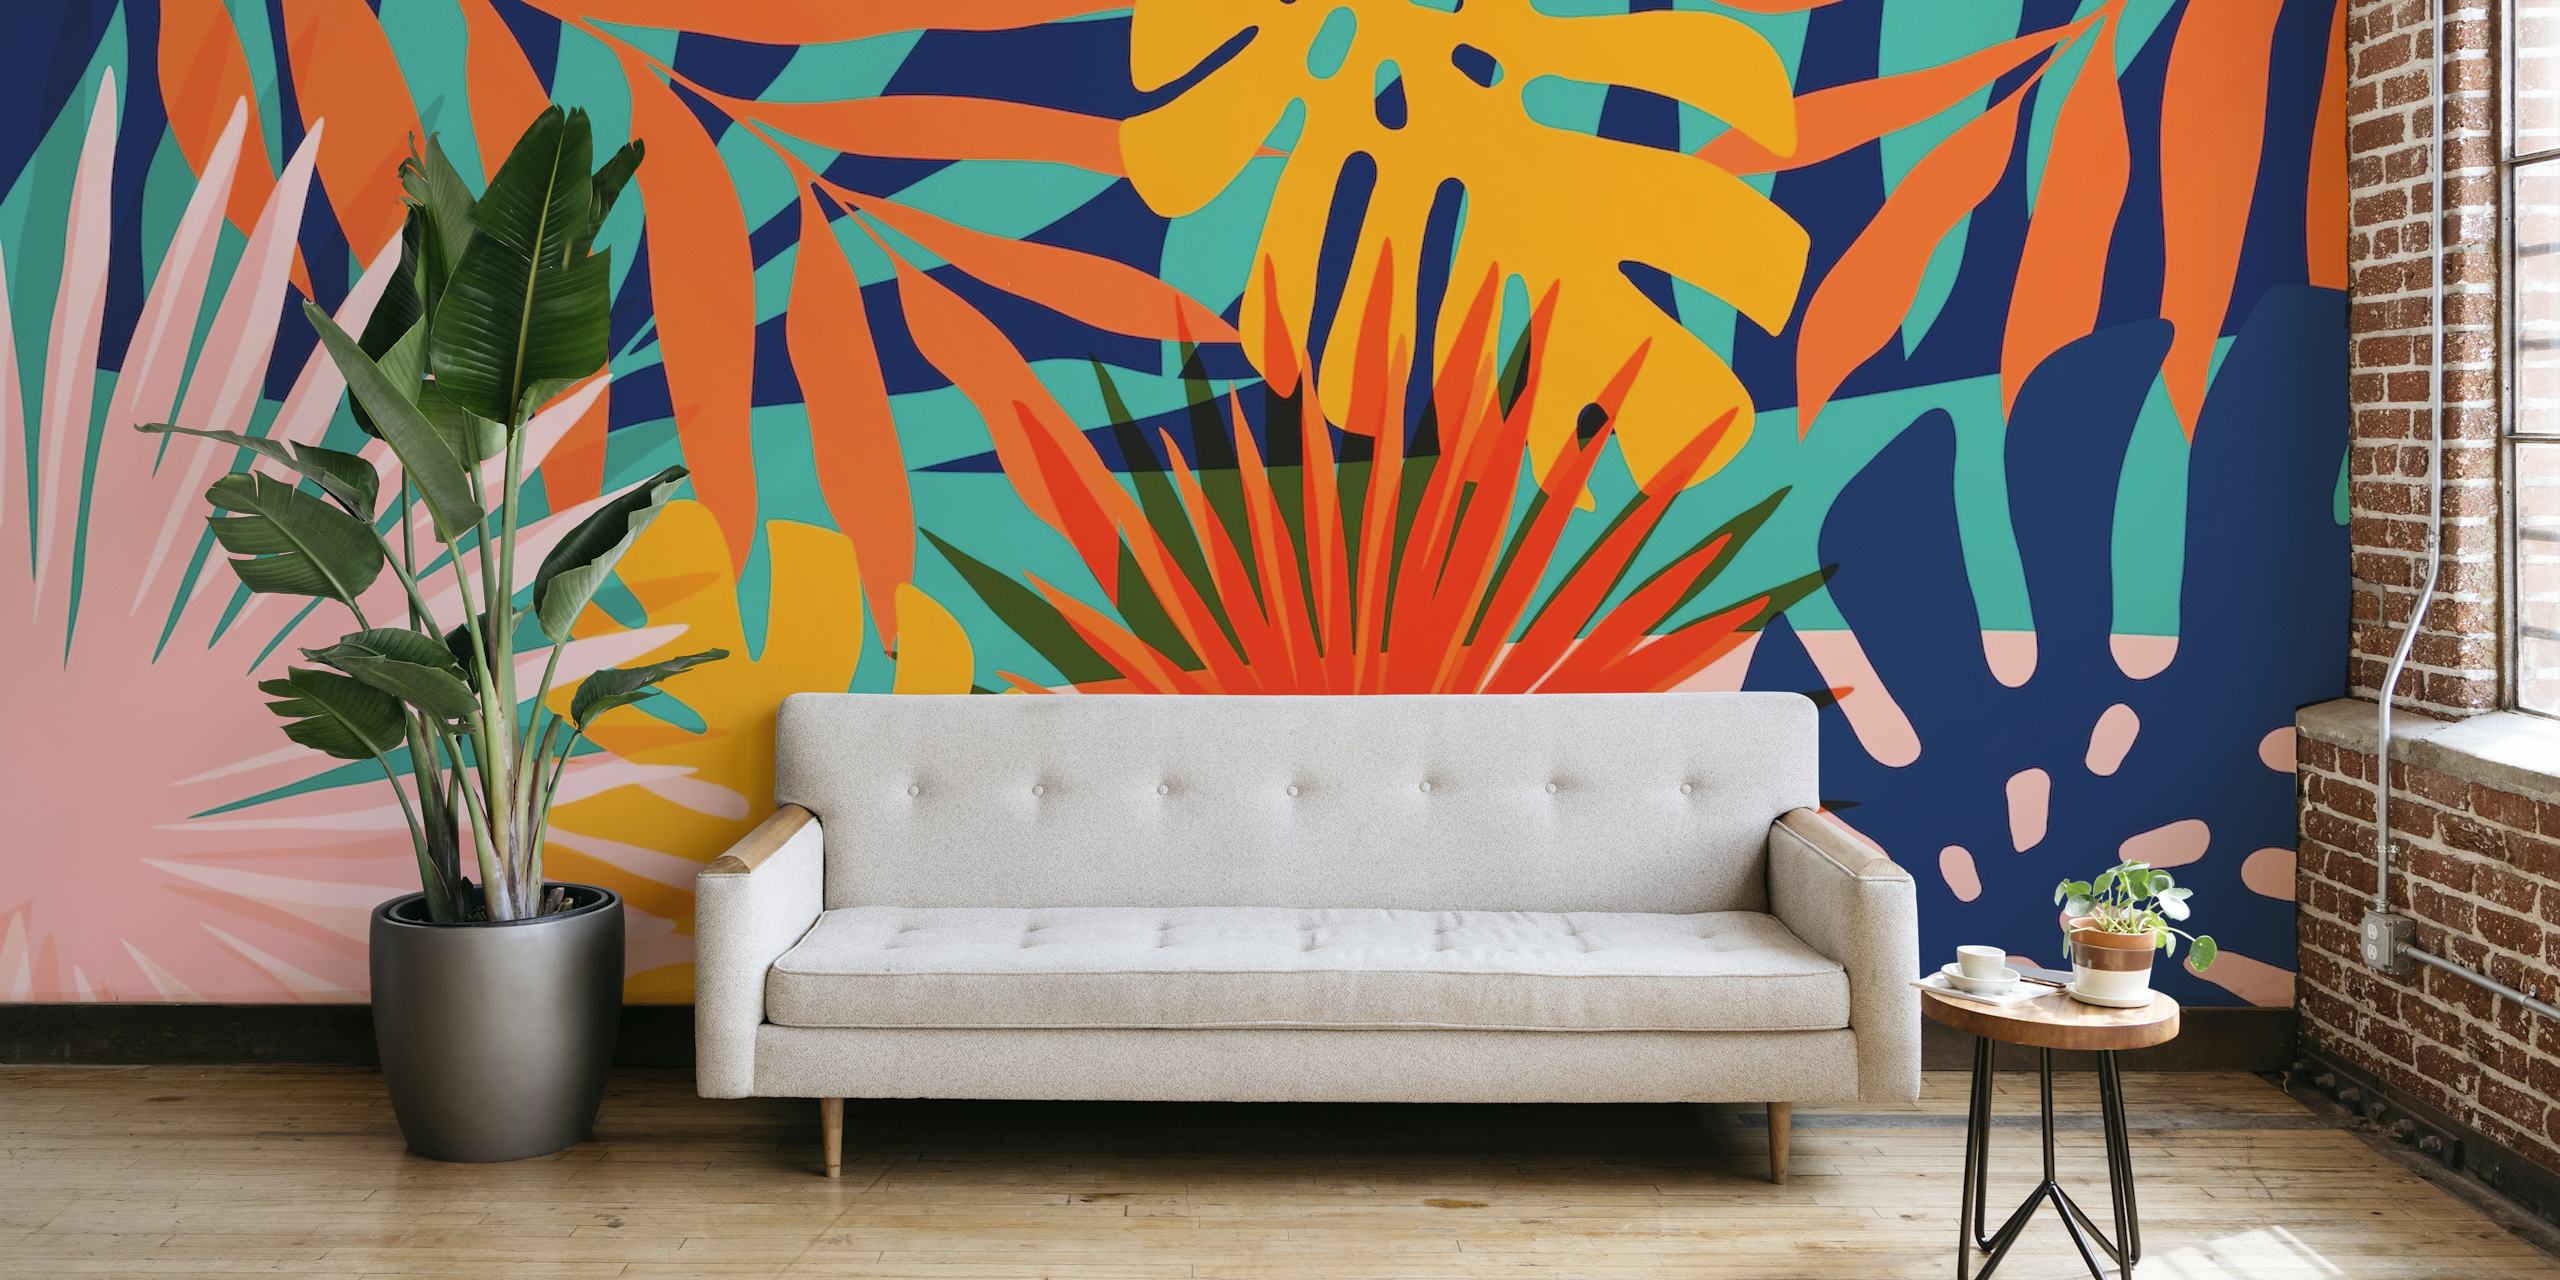 Vibrant tropical foliage wall mural with orange, green, and blue leaves